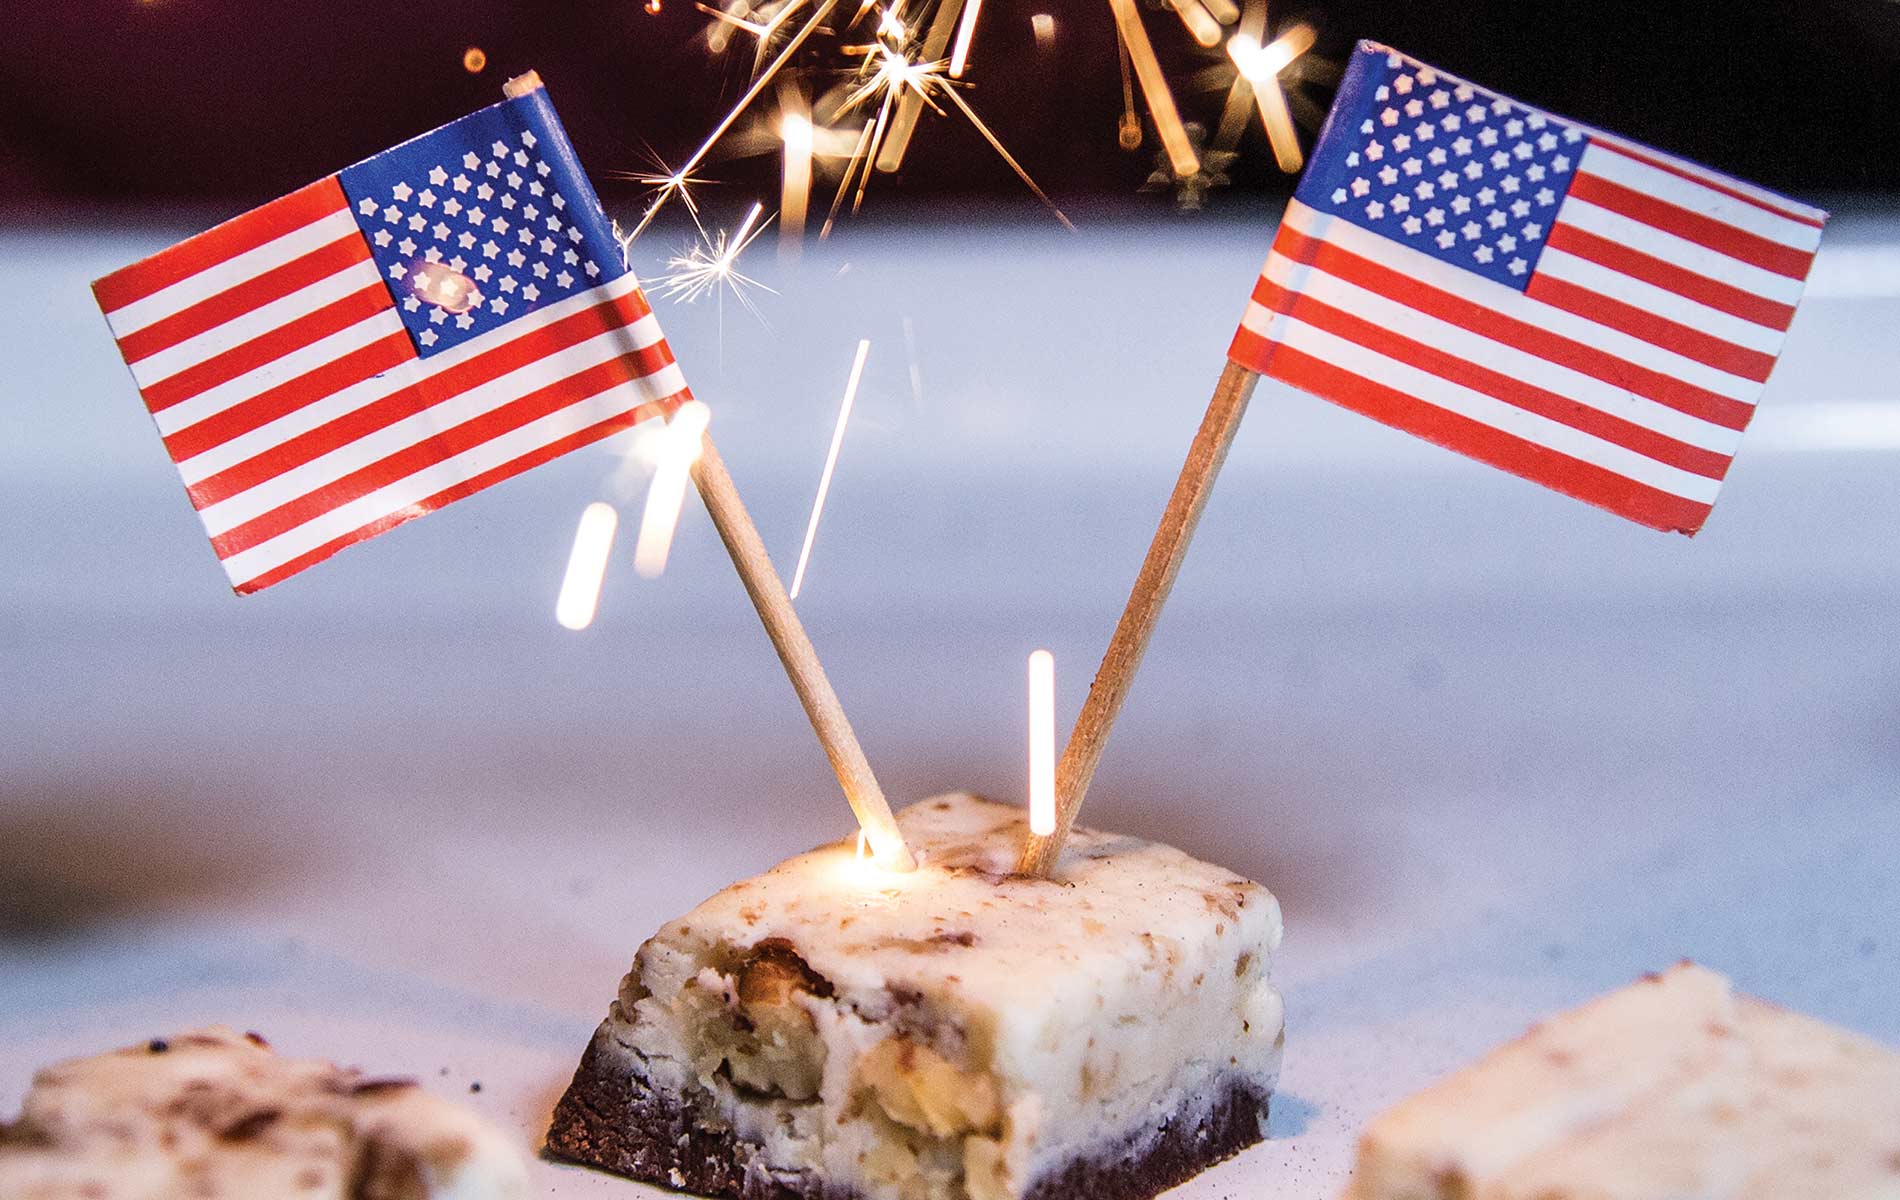 Cookies And Cream EOD Fudge With Two Mirrored American Flags And A Sparkler Background